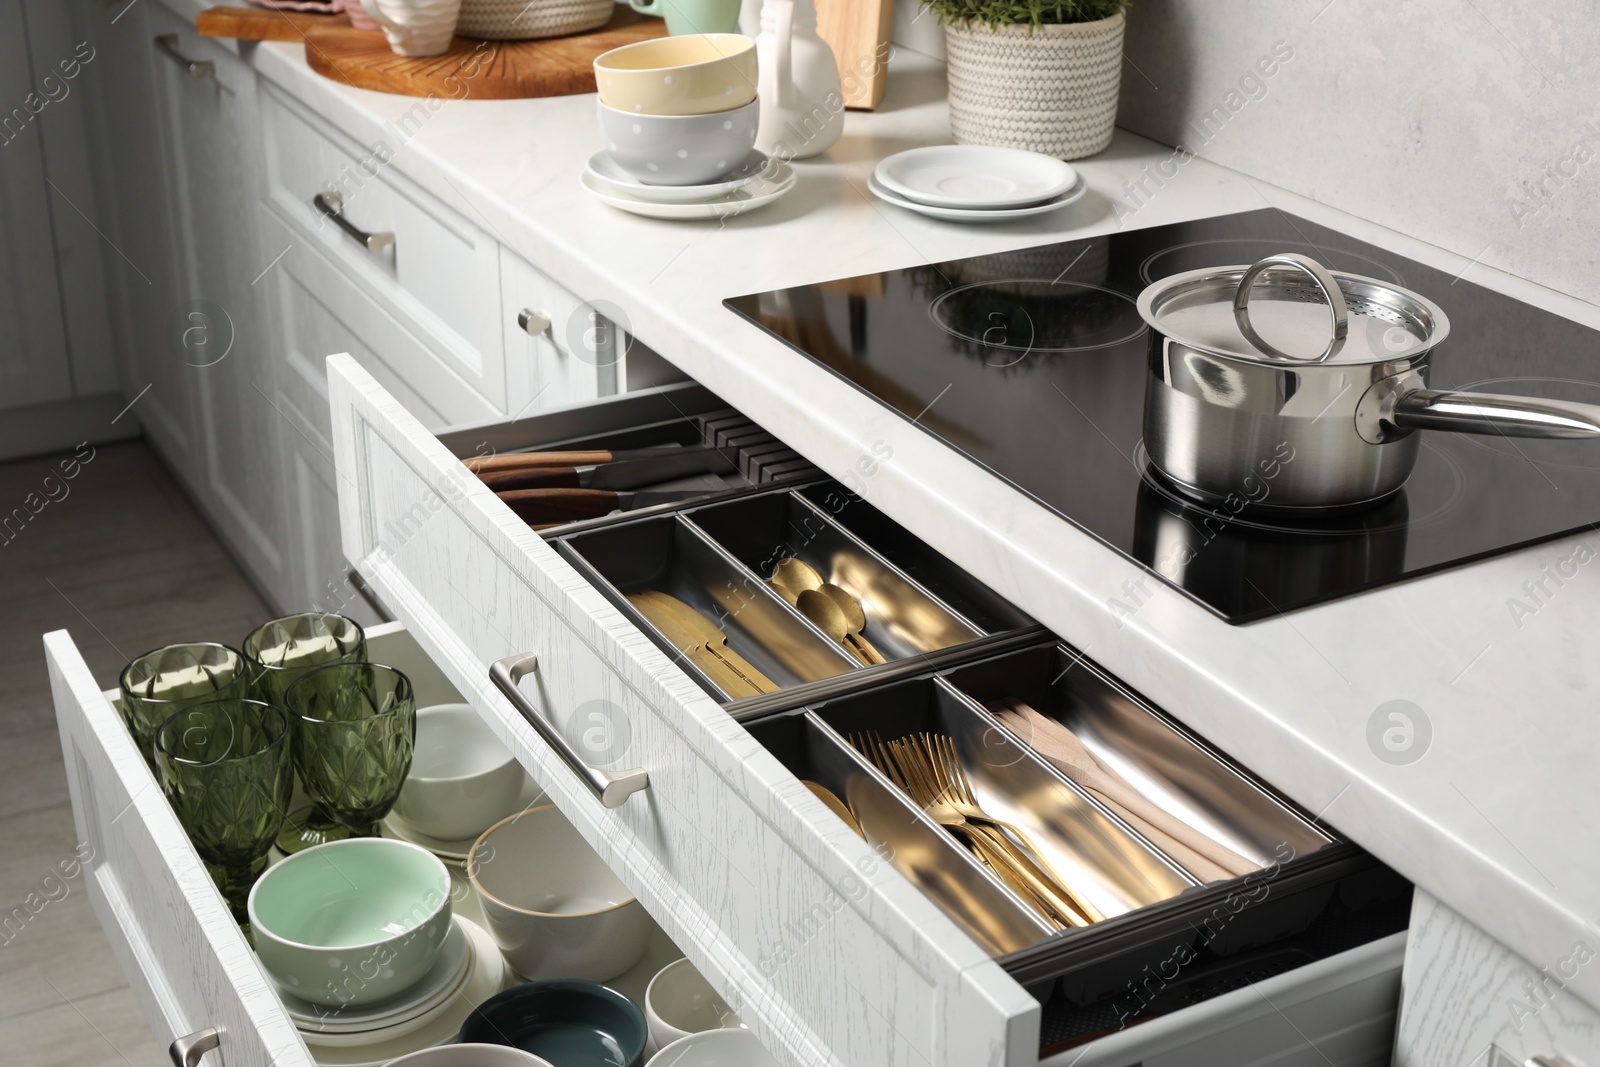 Photo of Ceramic dishware and cutlery in drawers in kitchen